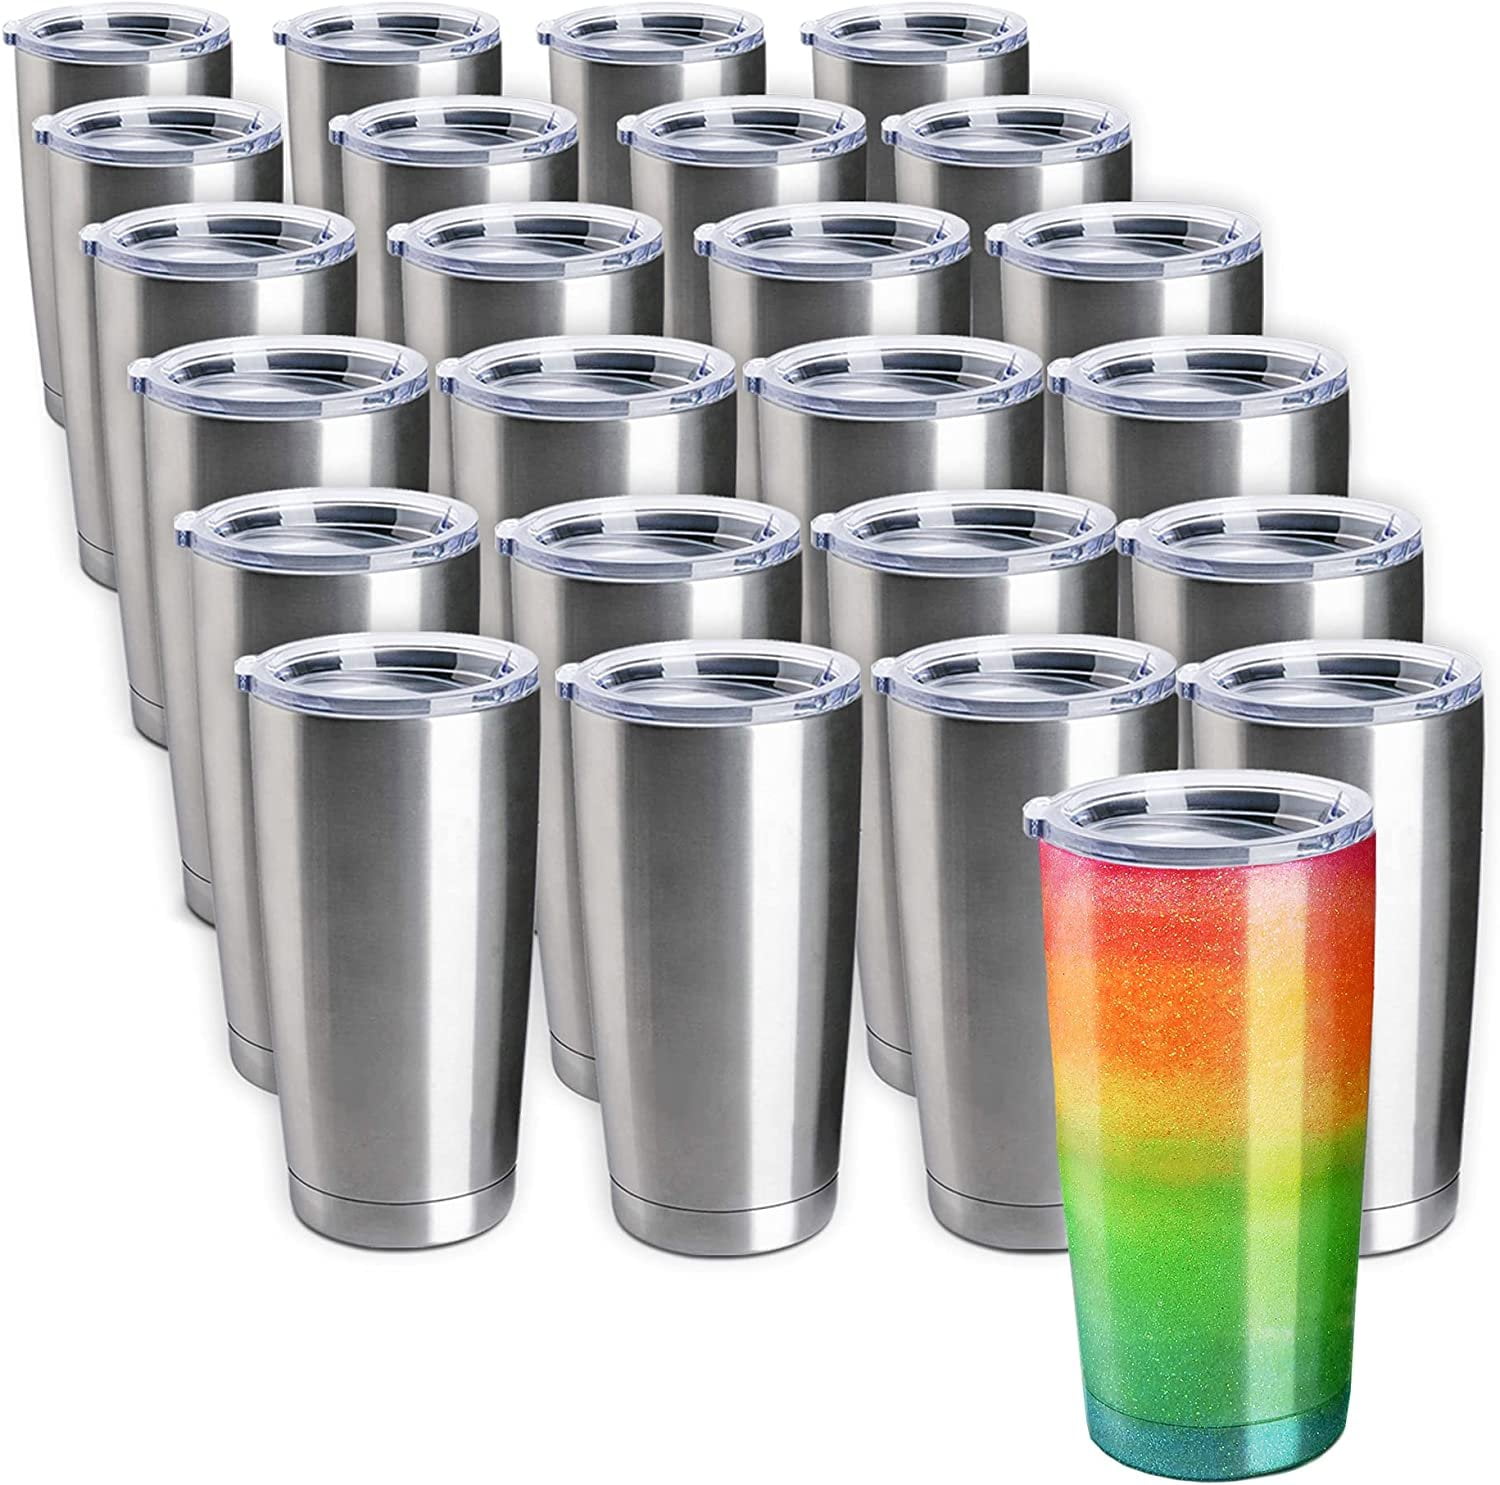 Stainless Steel Tumblers Bulk 25-Pack 20oz Double Wall Vacuum Insulated by  Pixiss, Bulk Cup Coffee Mug with Lid, Travel Mug Works Great for Ice Drink,  Hot Beverage Perfect for Epoxy Glitter Tumblers 